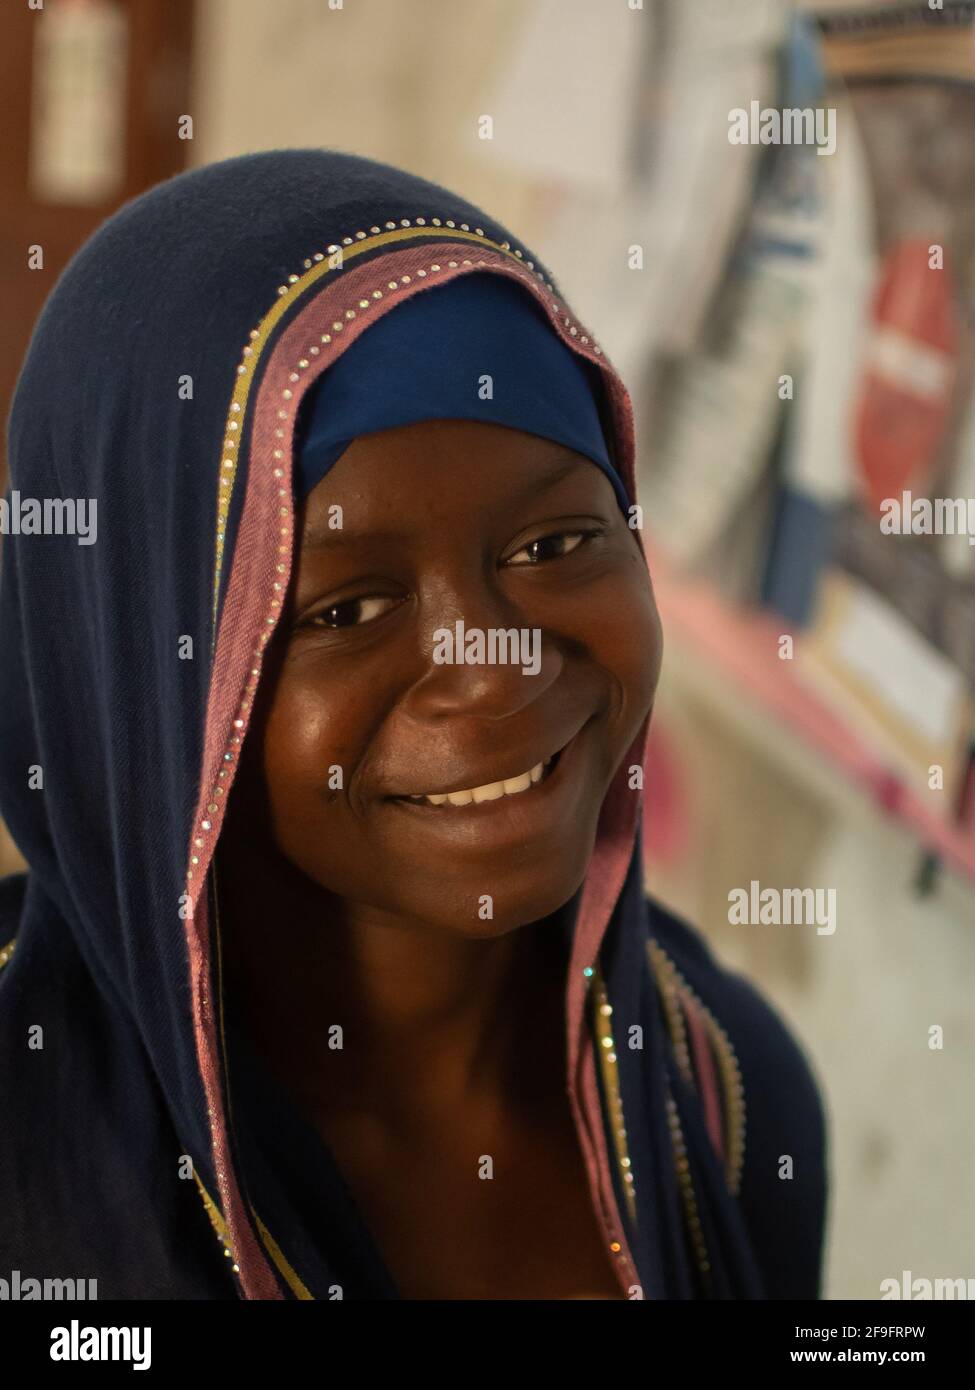 Dodoma, Tanzania. 10-10-2018. Portrait of a beautiful and smiling black muslim young woman waiting at the hospital for assistance. Stock Photo